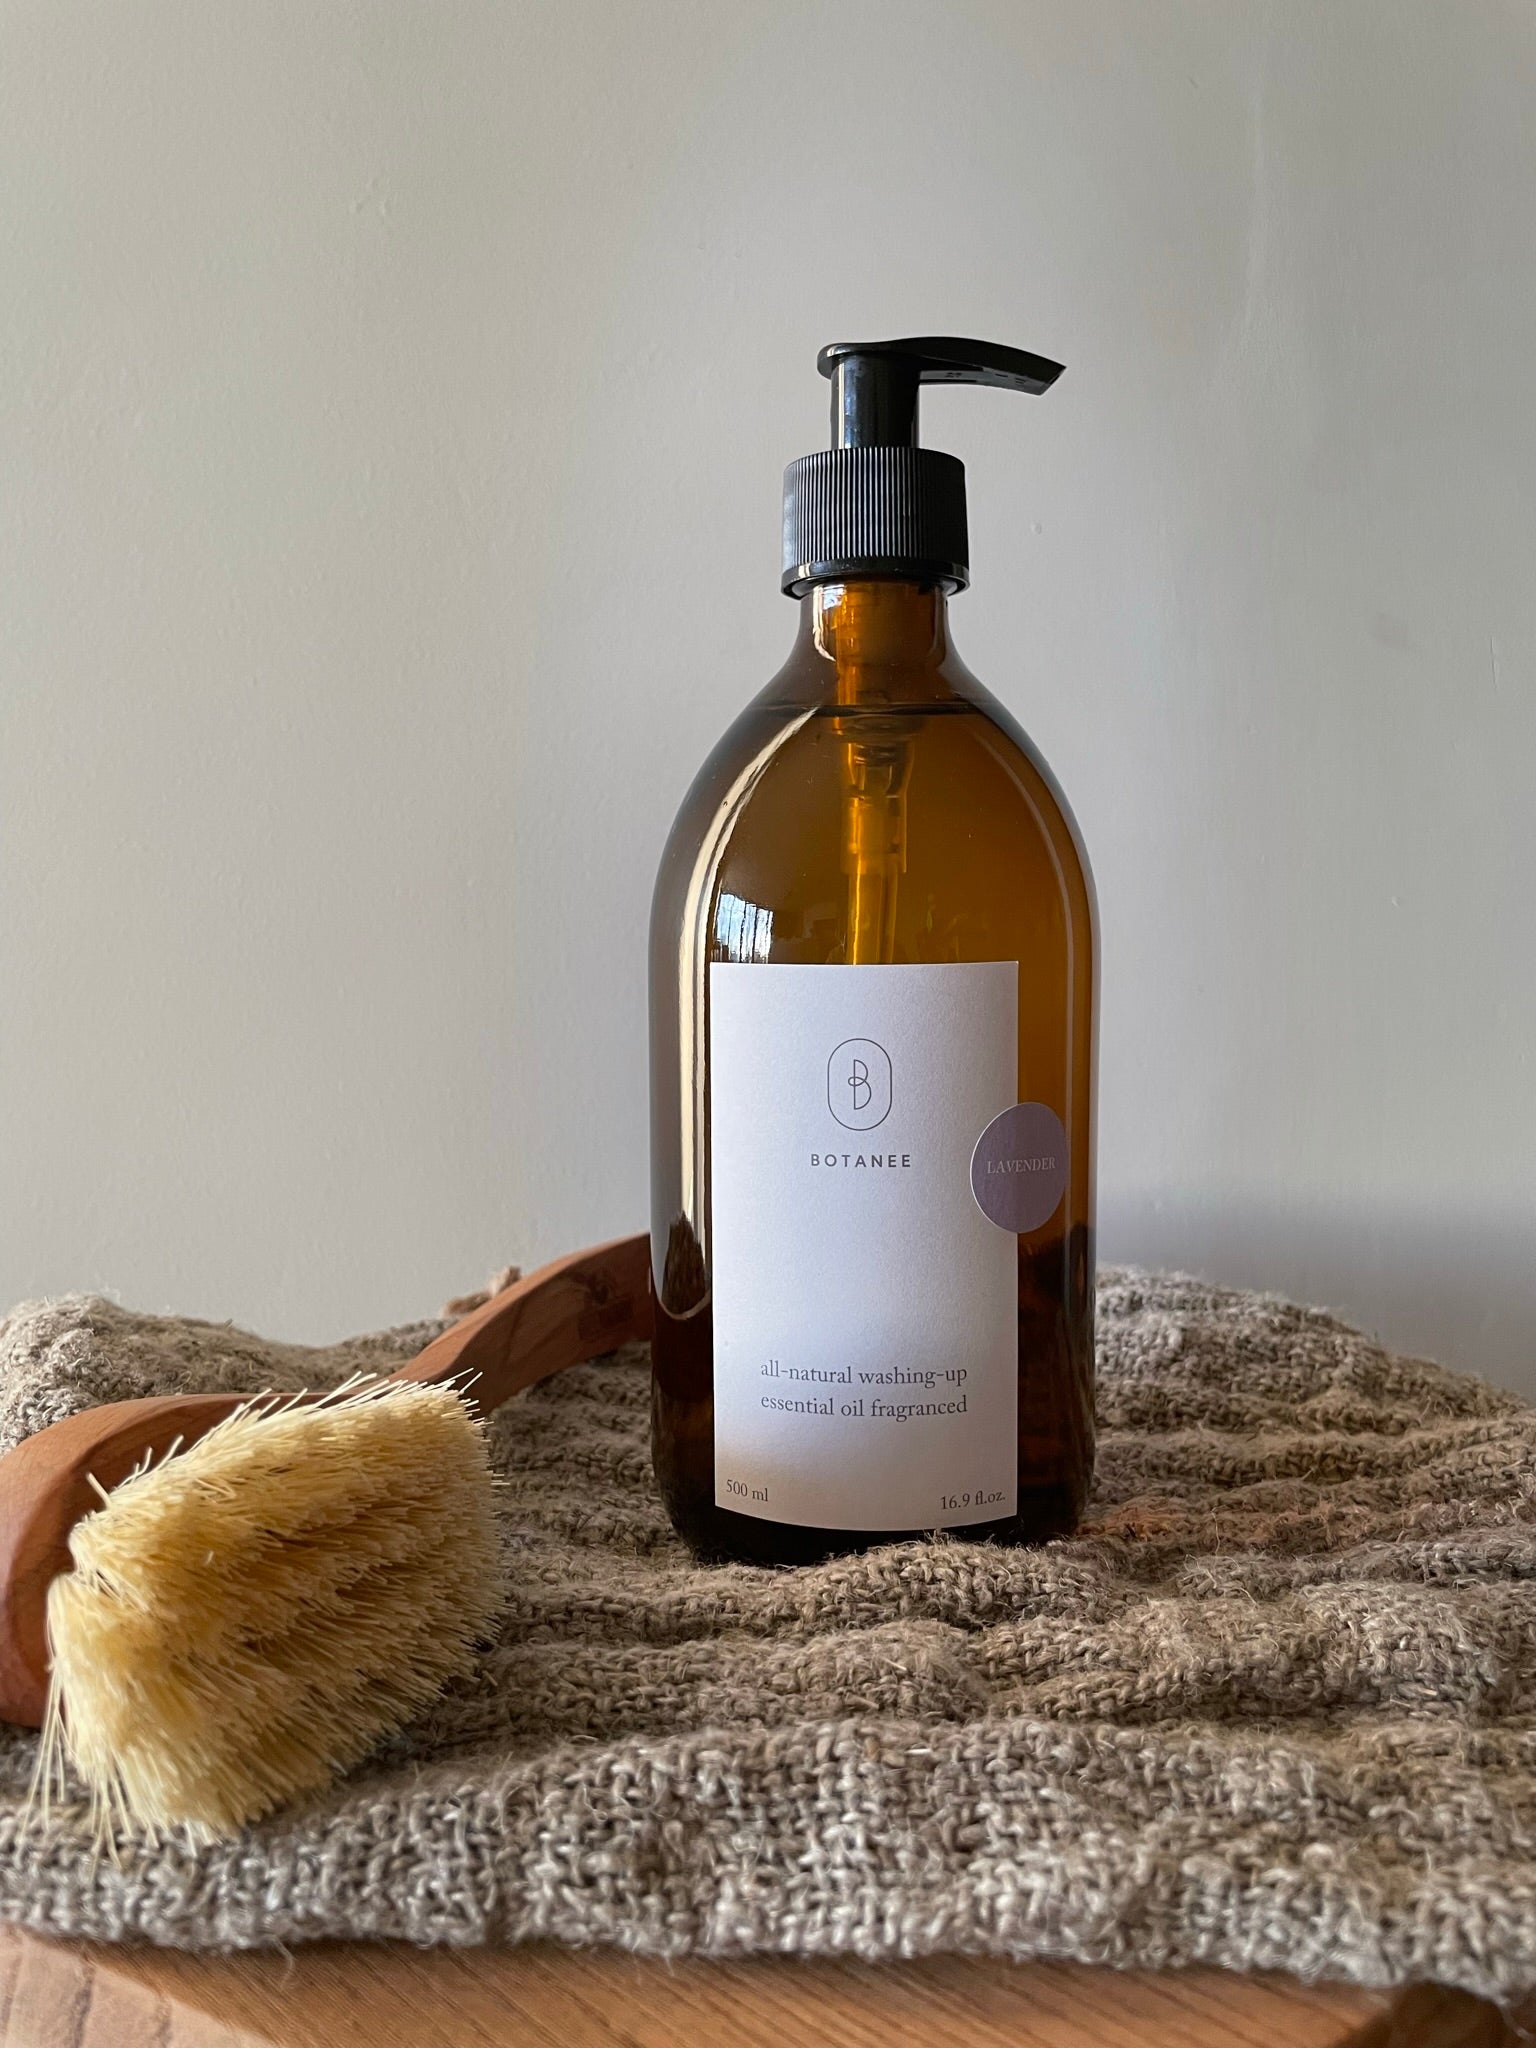 500ml | all-natural washing-up liquid | French lavender